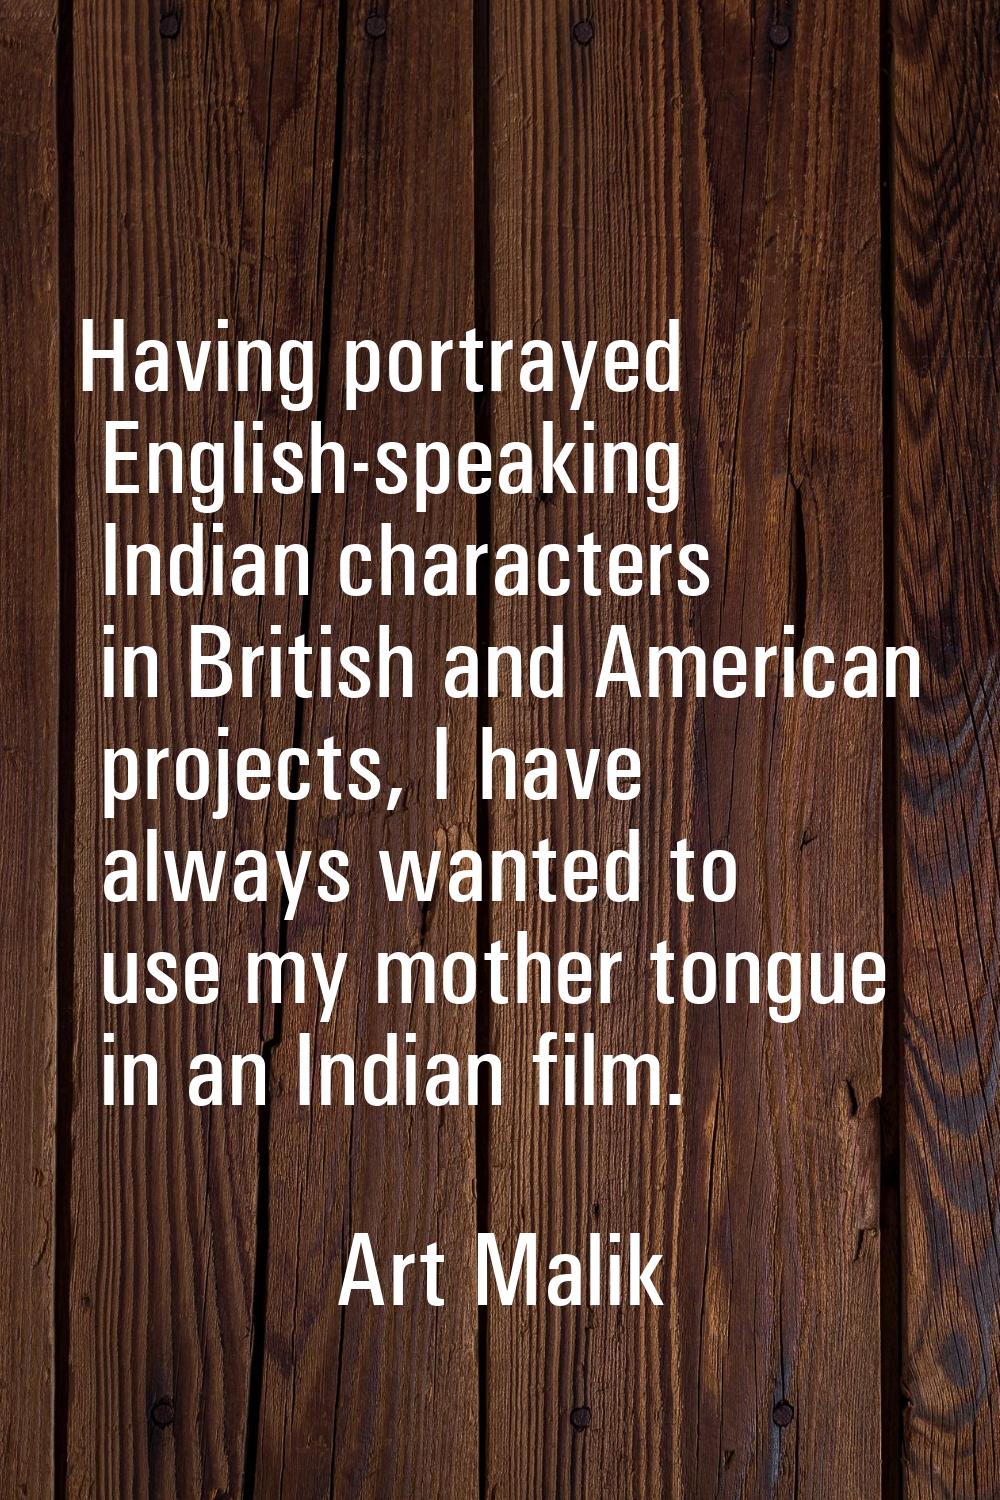 Having portrayed English-speaking Indian characters in British and American projects, I have always